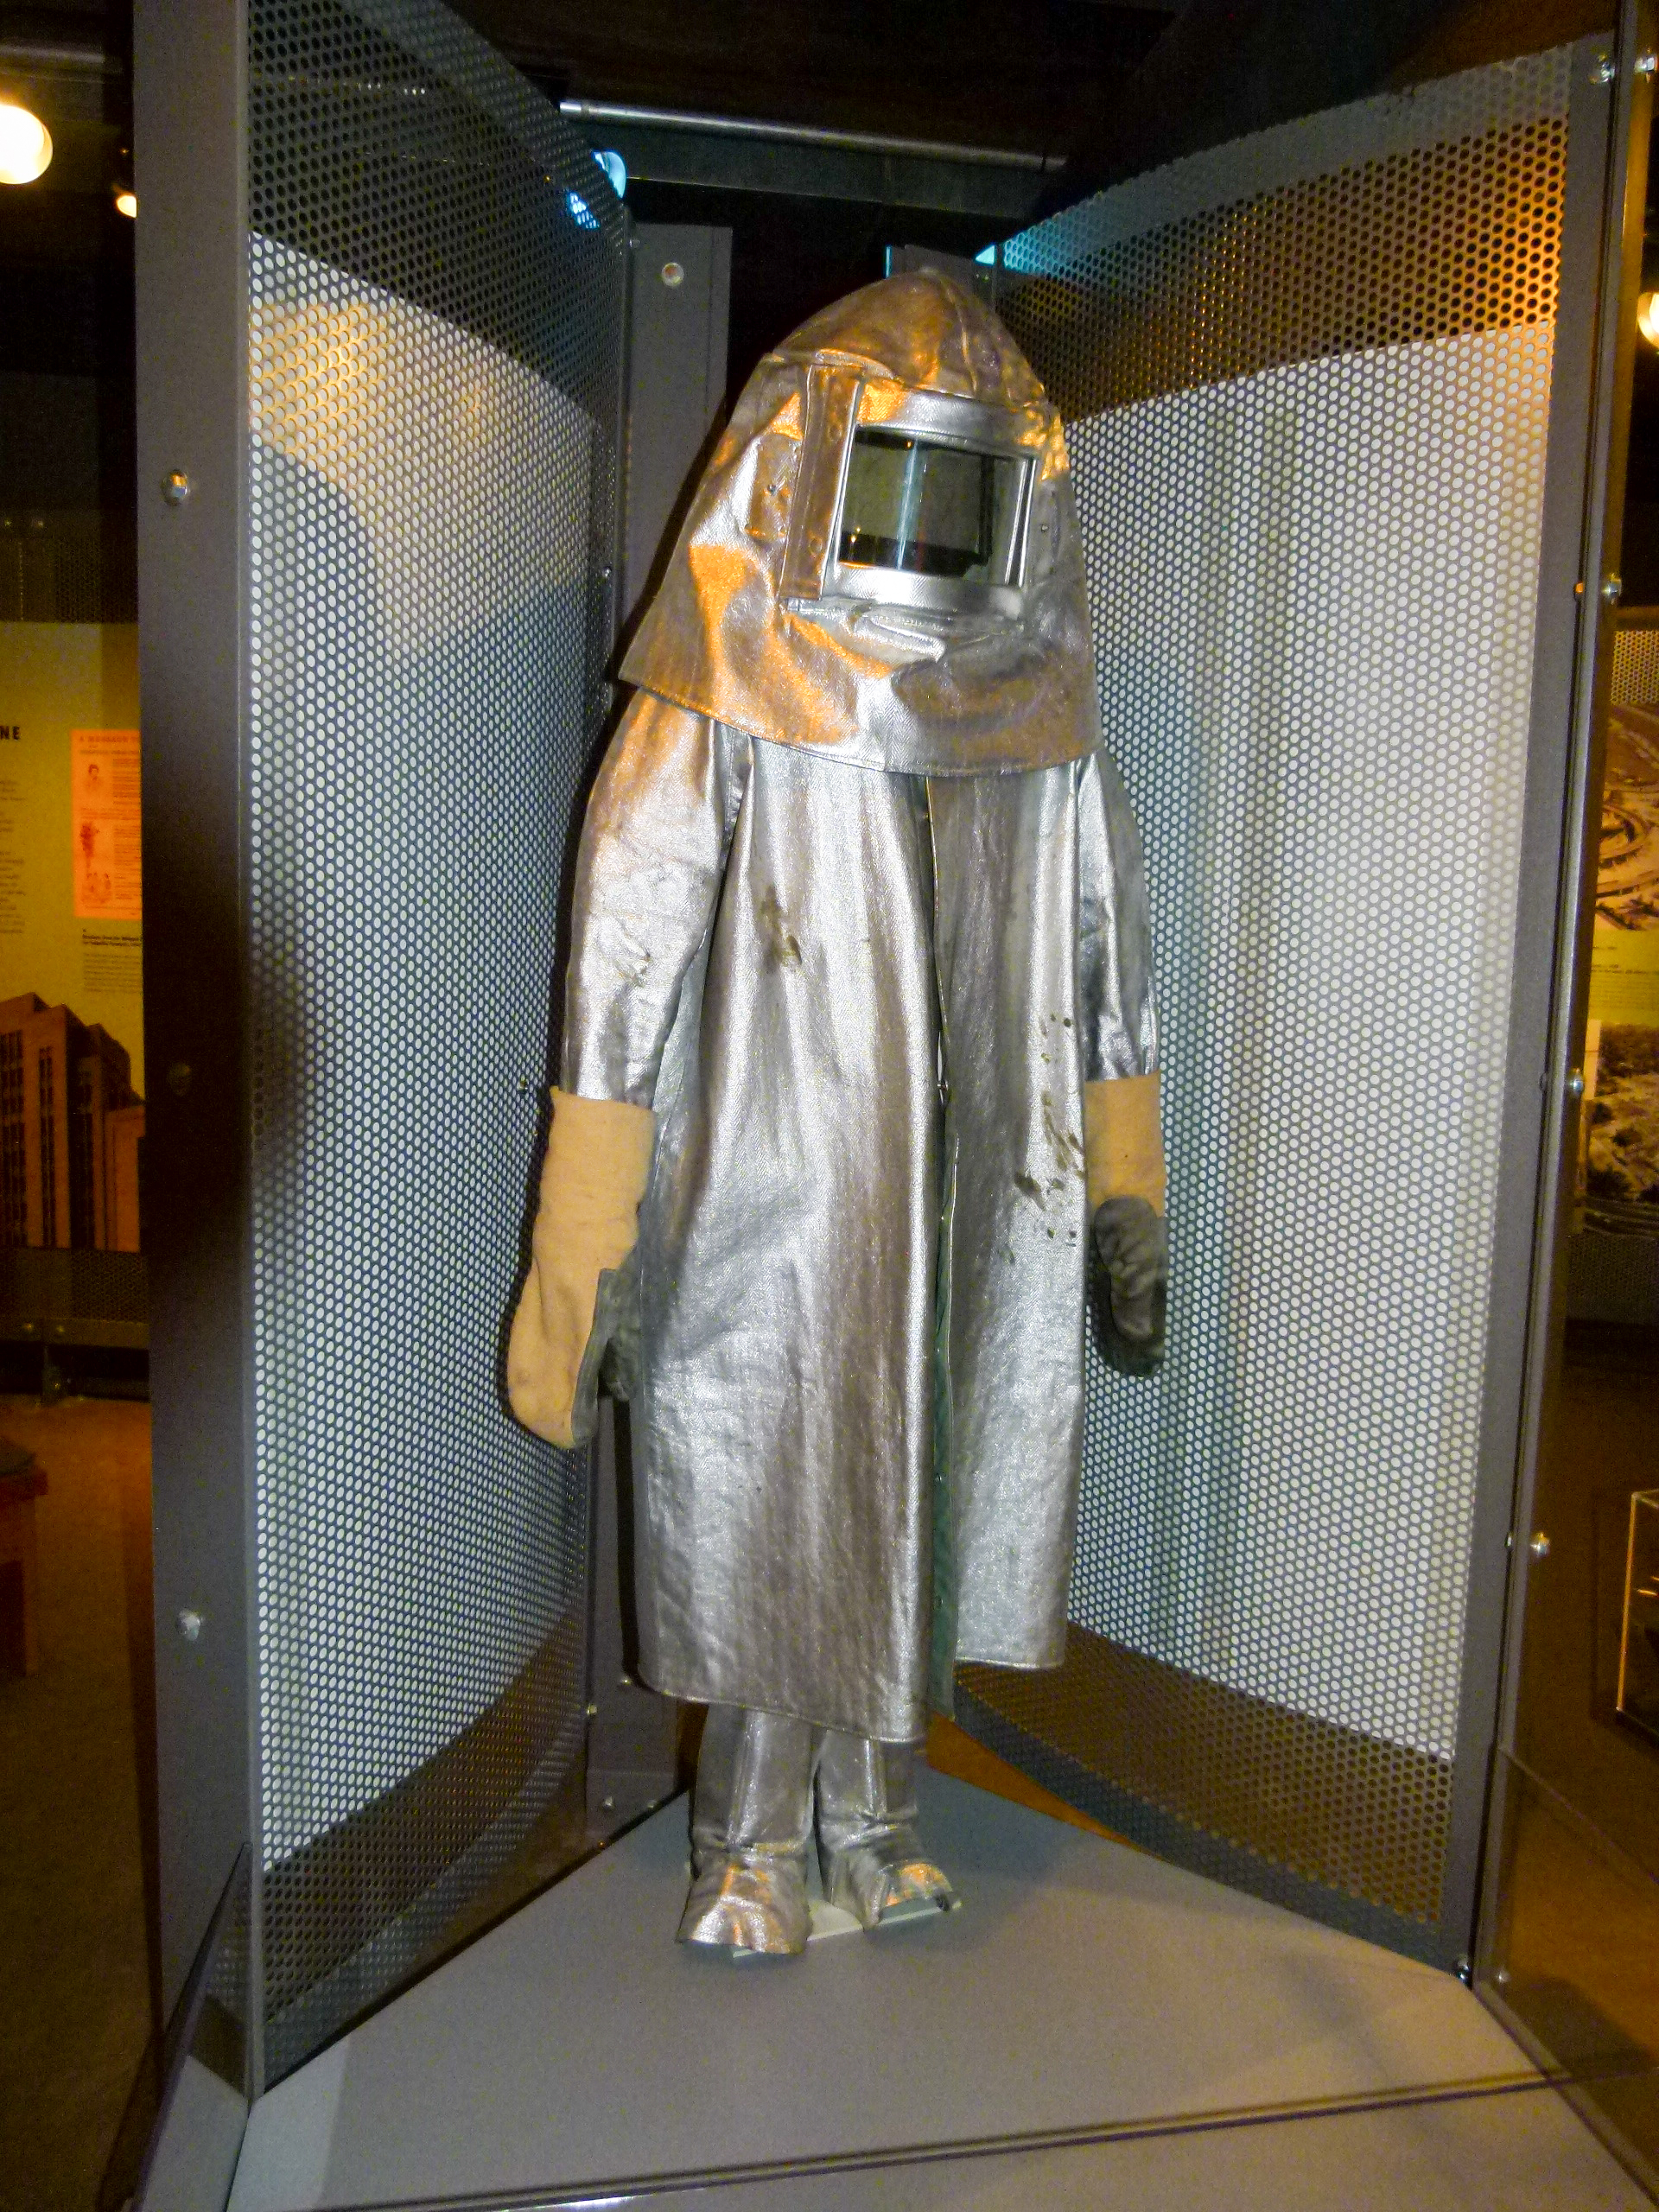 No this isn't an early NASA spacesuit, it's protective gear that steelworkers working close to the blast furnace wear.